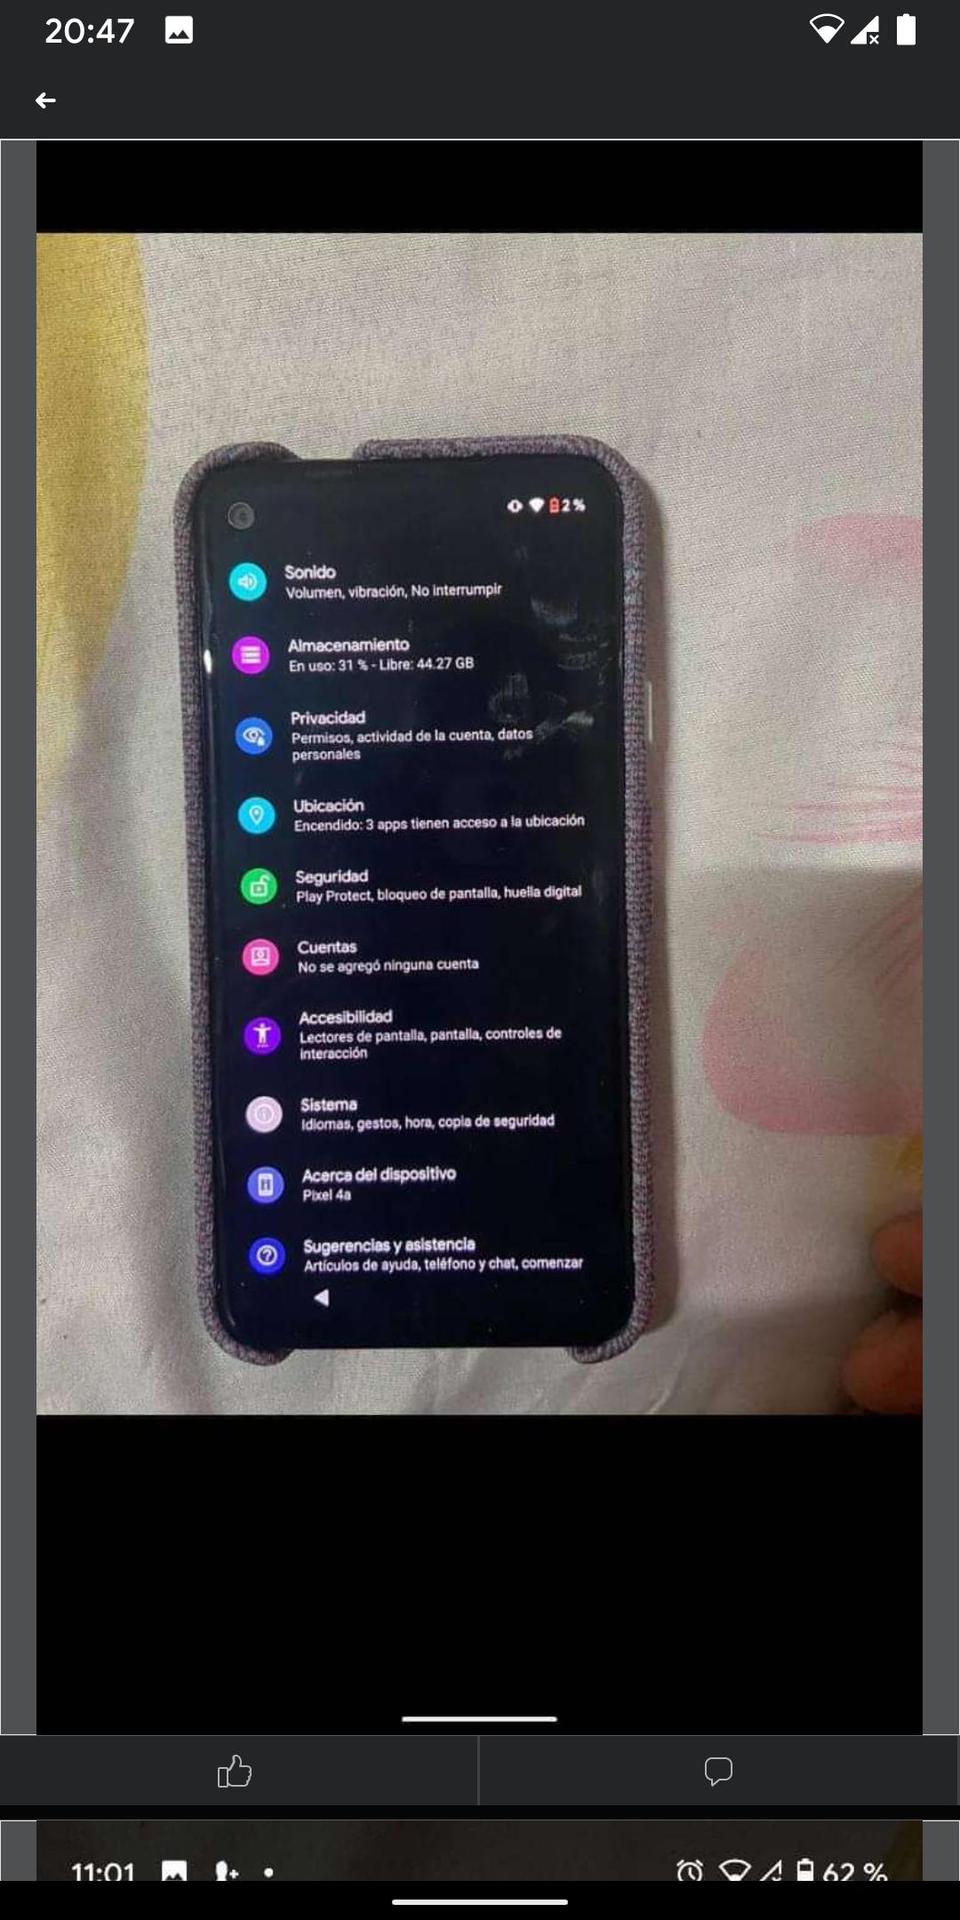 Google Pixel 4a leak showing display and settings